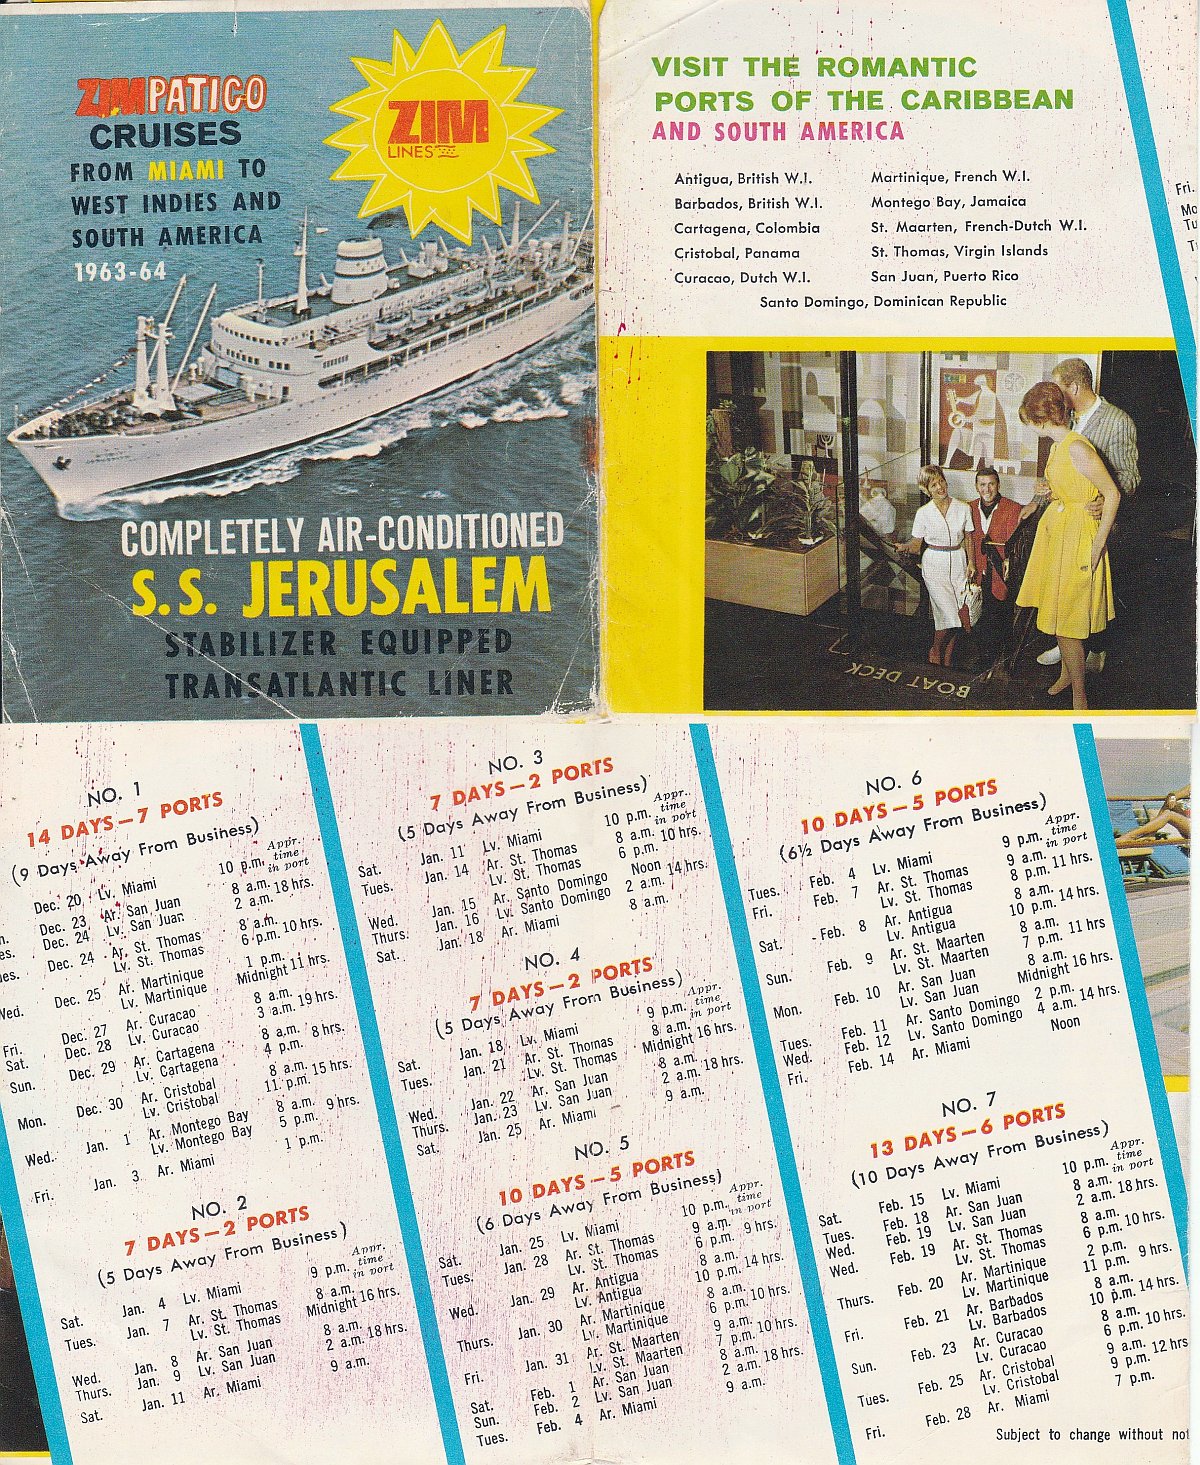 ss Jerusalem effective winter 1963/1964: Visit the romantic ports of  the Caribbean and South America